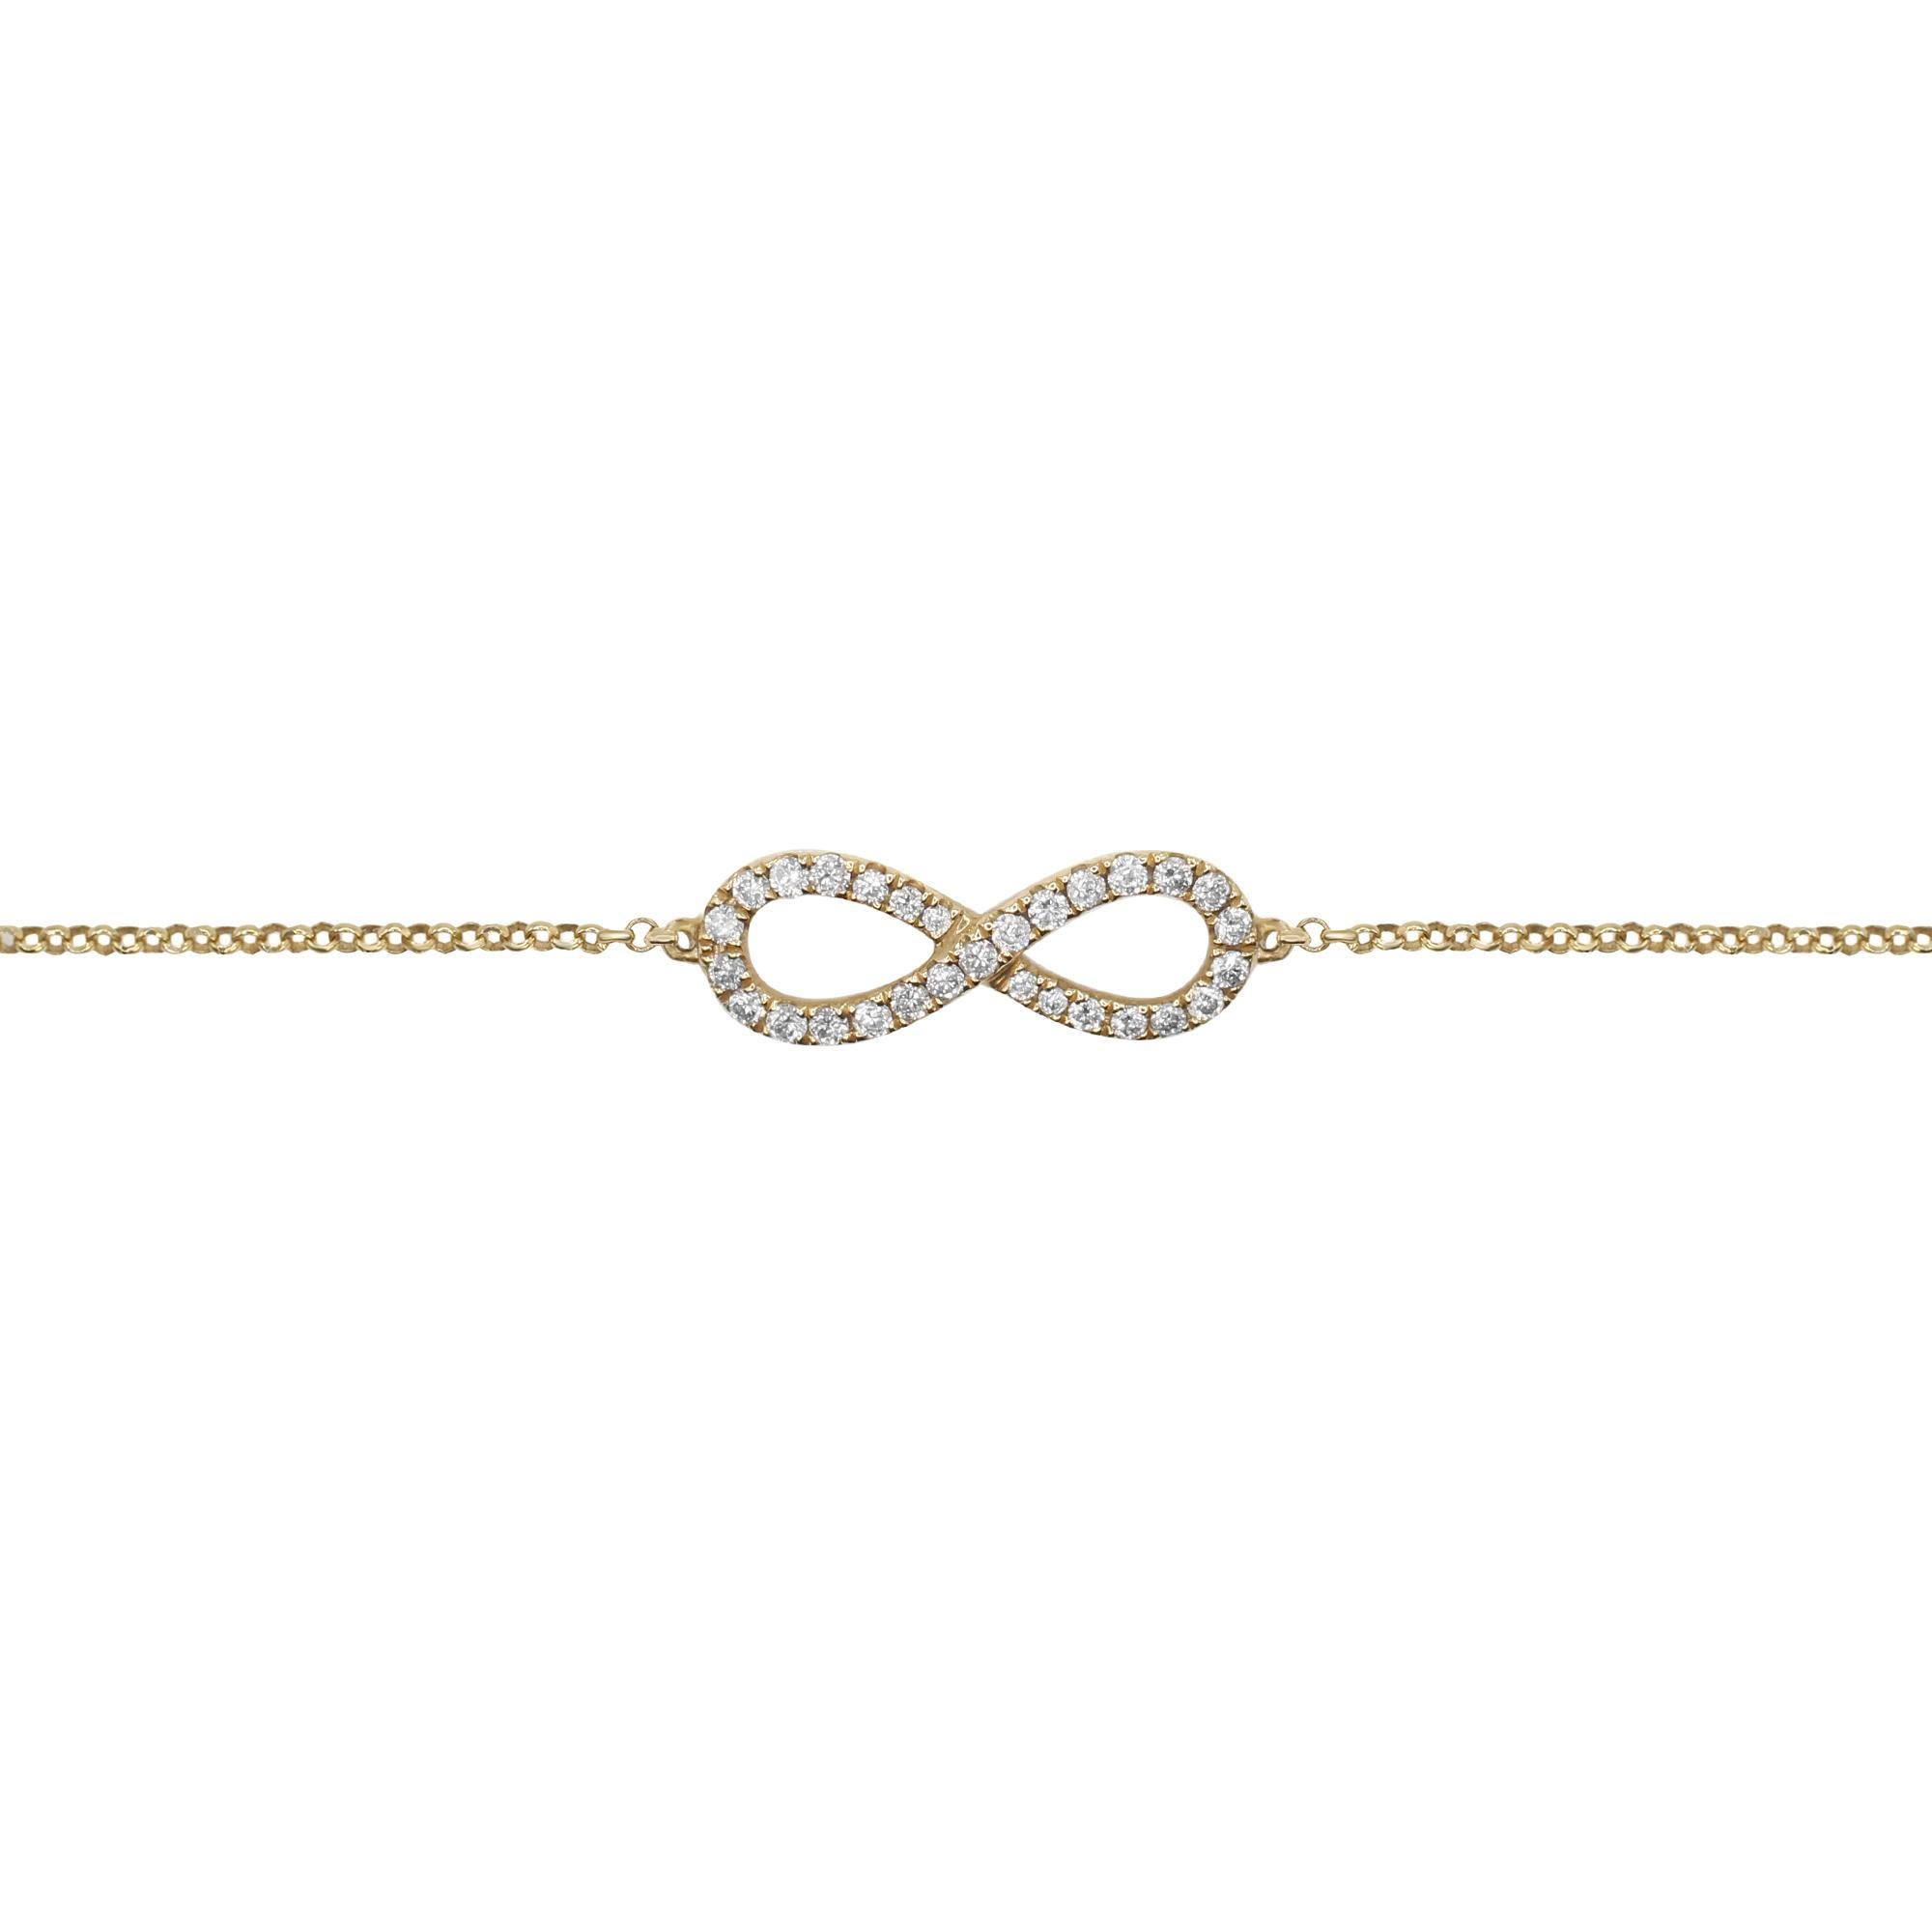 A gorgeous simple diamond bracelet, an Infinity style set with clean and sparkly diamonds. Total carat weight: 0.25. Diamond color G-H and SI1 clarity. 
Made with 14K Yellow Gold. Bracelet length: 7.25. Comes with a presentable gift box and